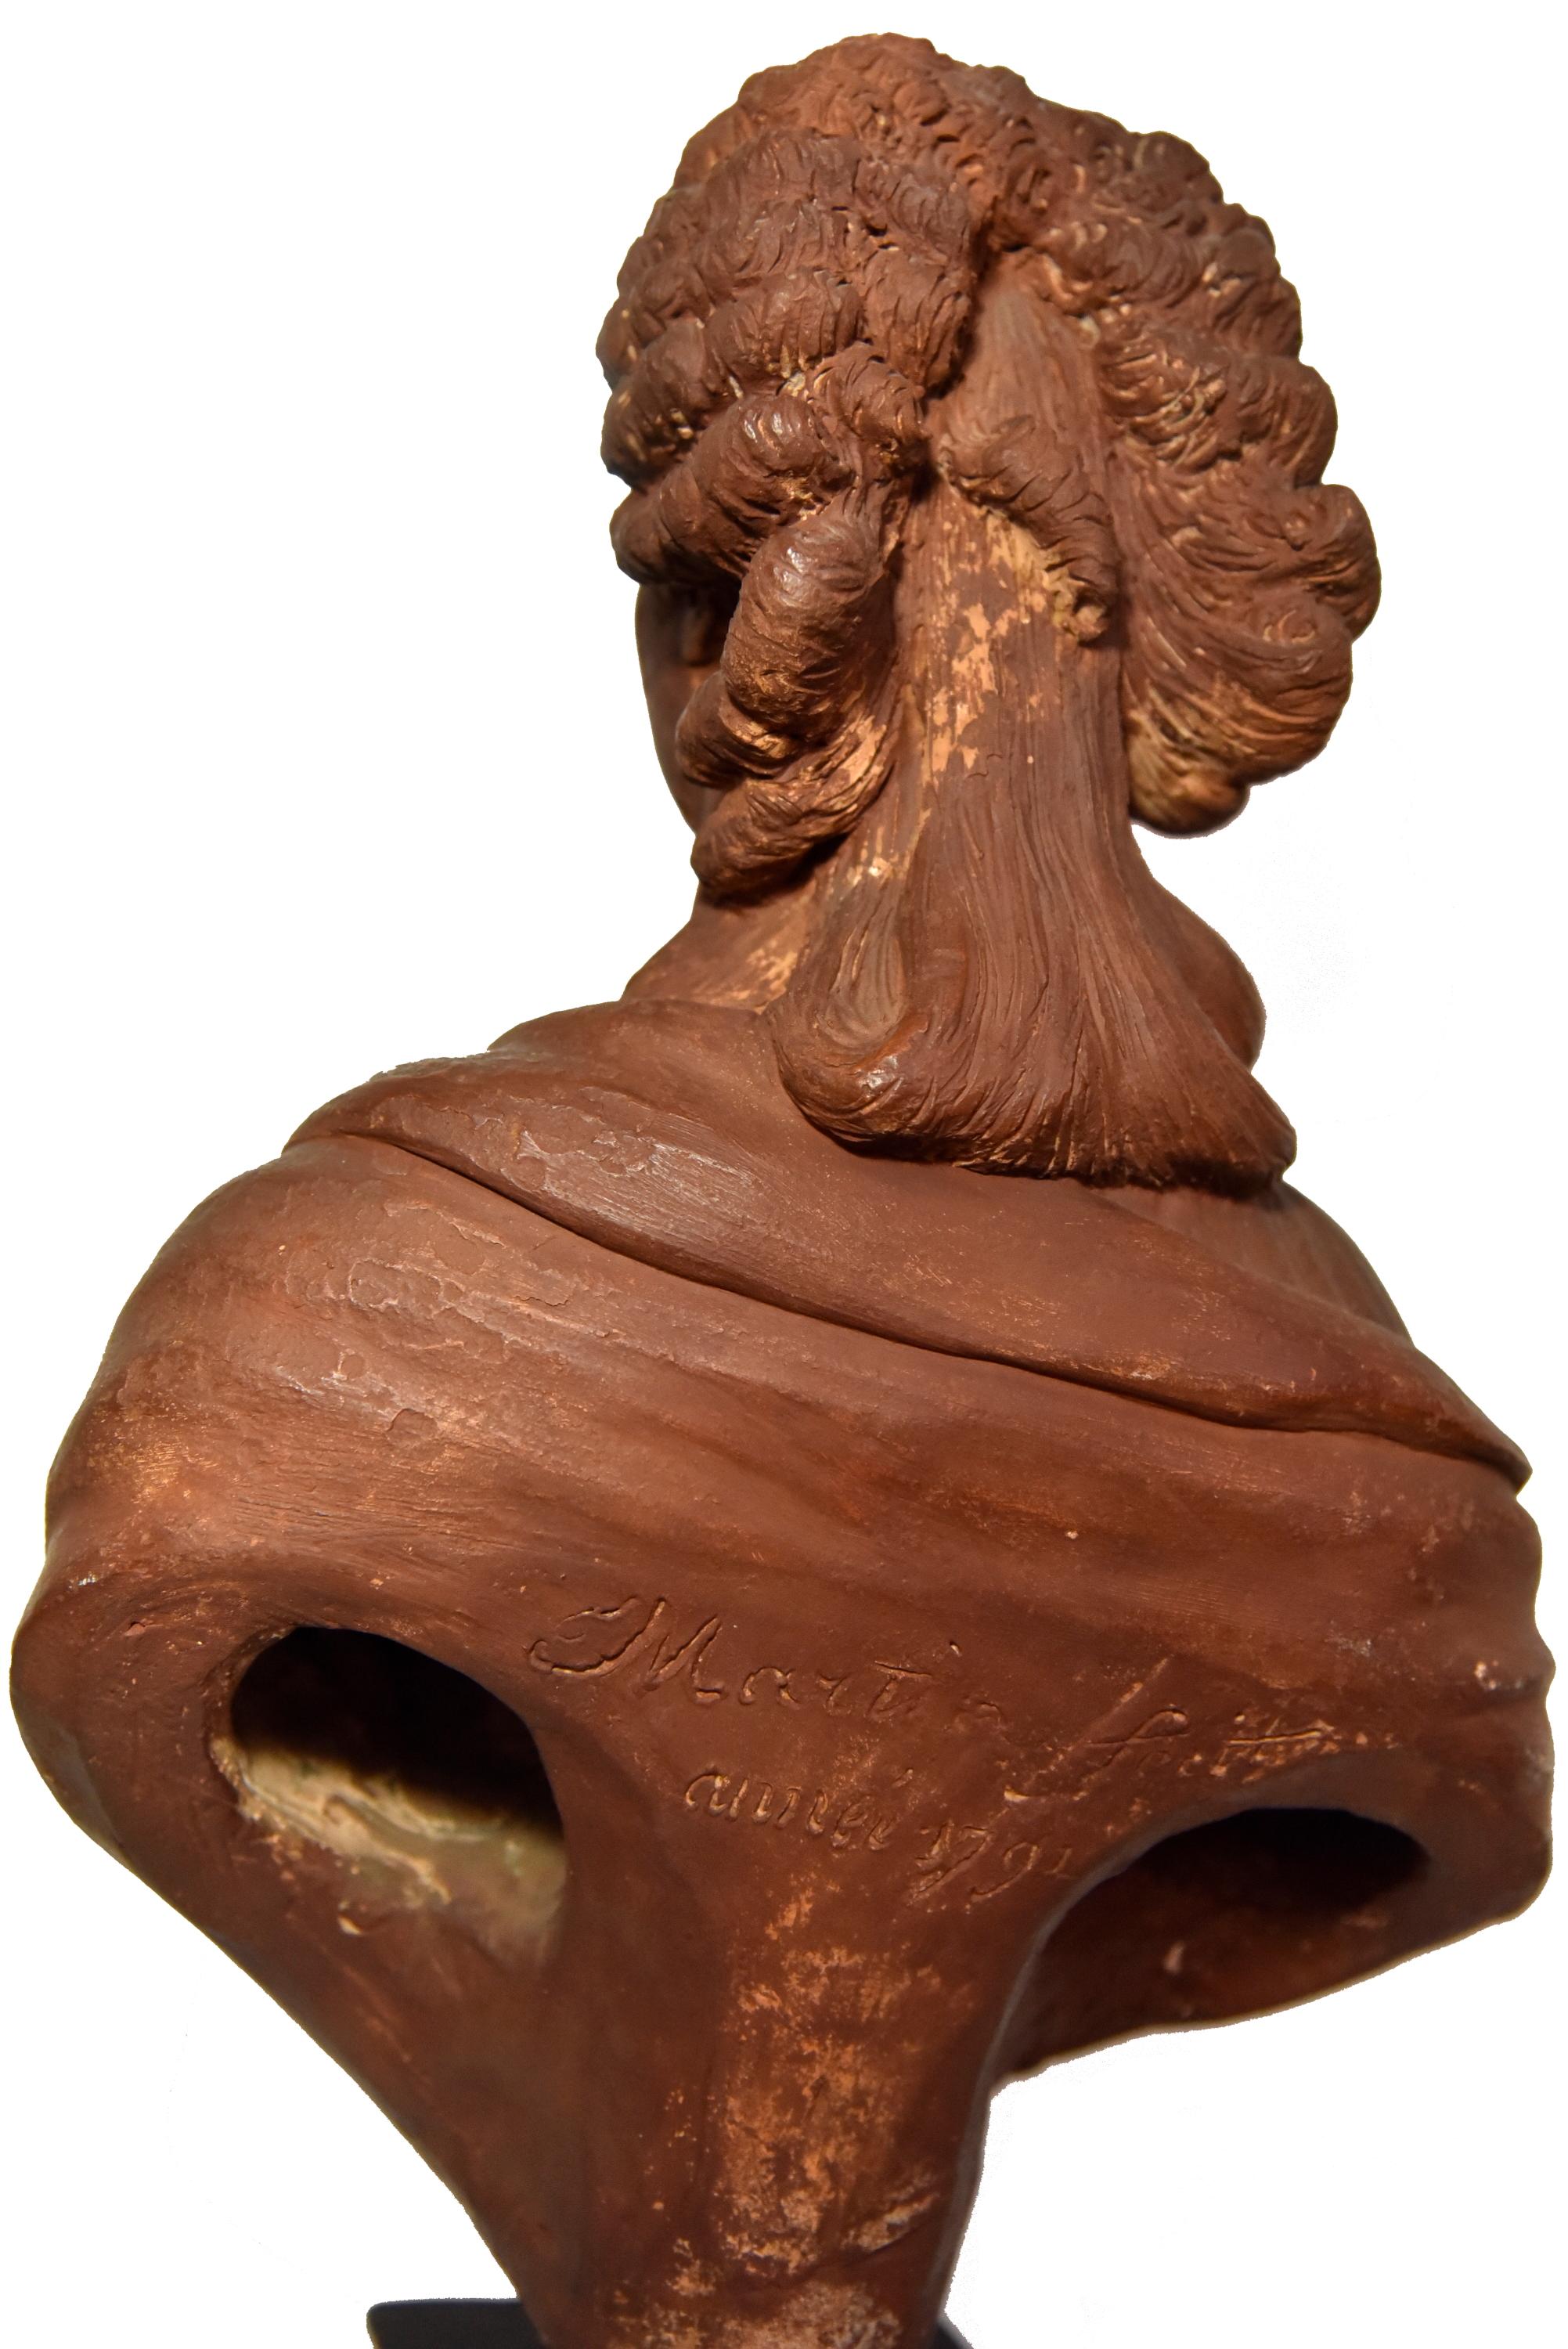 Terracotta bust of a woman from the revolutionary period by Martin de Grenoble,  - Brown Figurative Sculpture by François-Joseph Martin de Grenoble